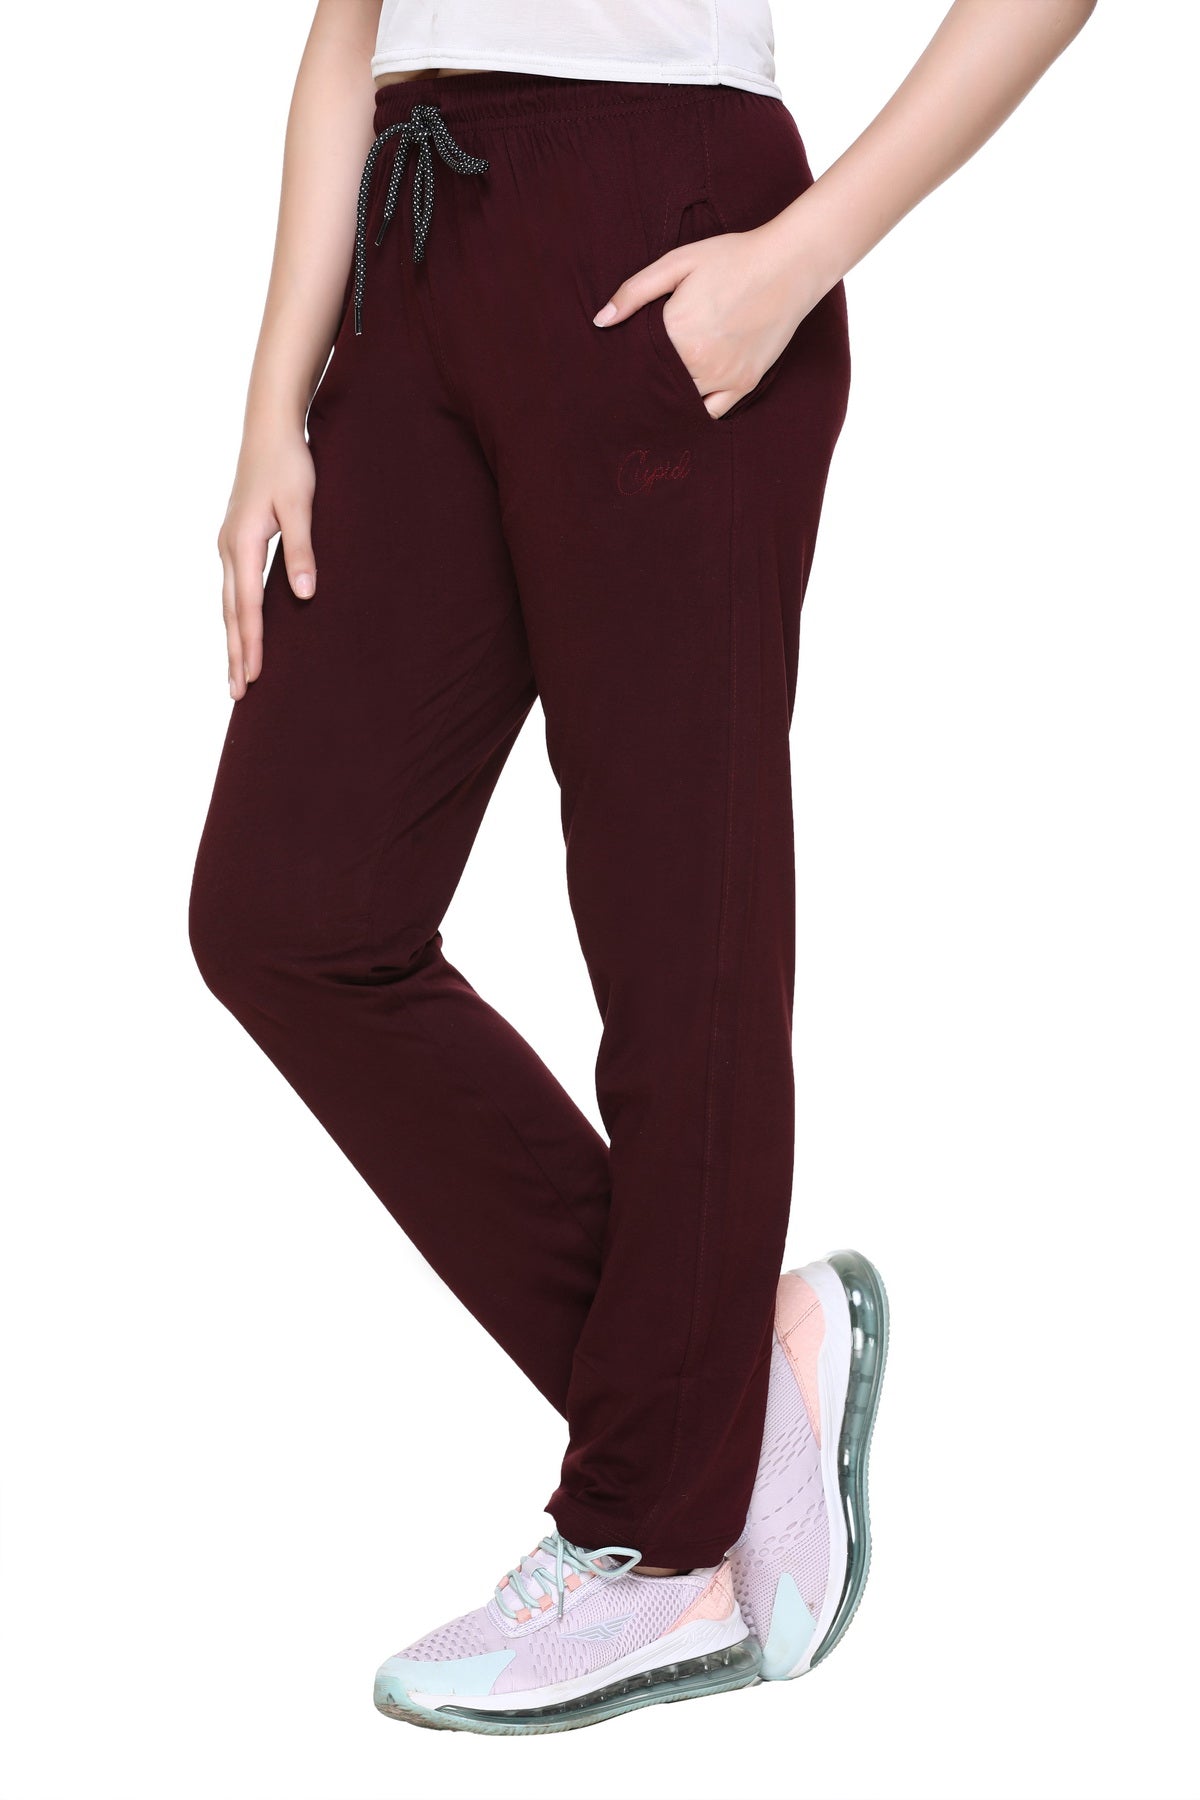 Cotton Pants For Women - Buy Cotton Pants For Women online in India